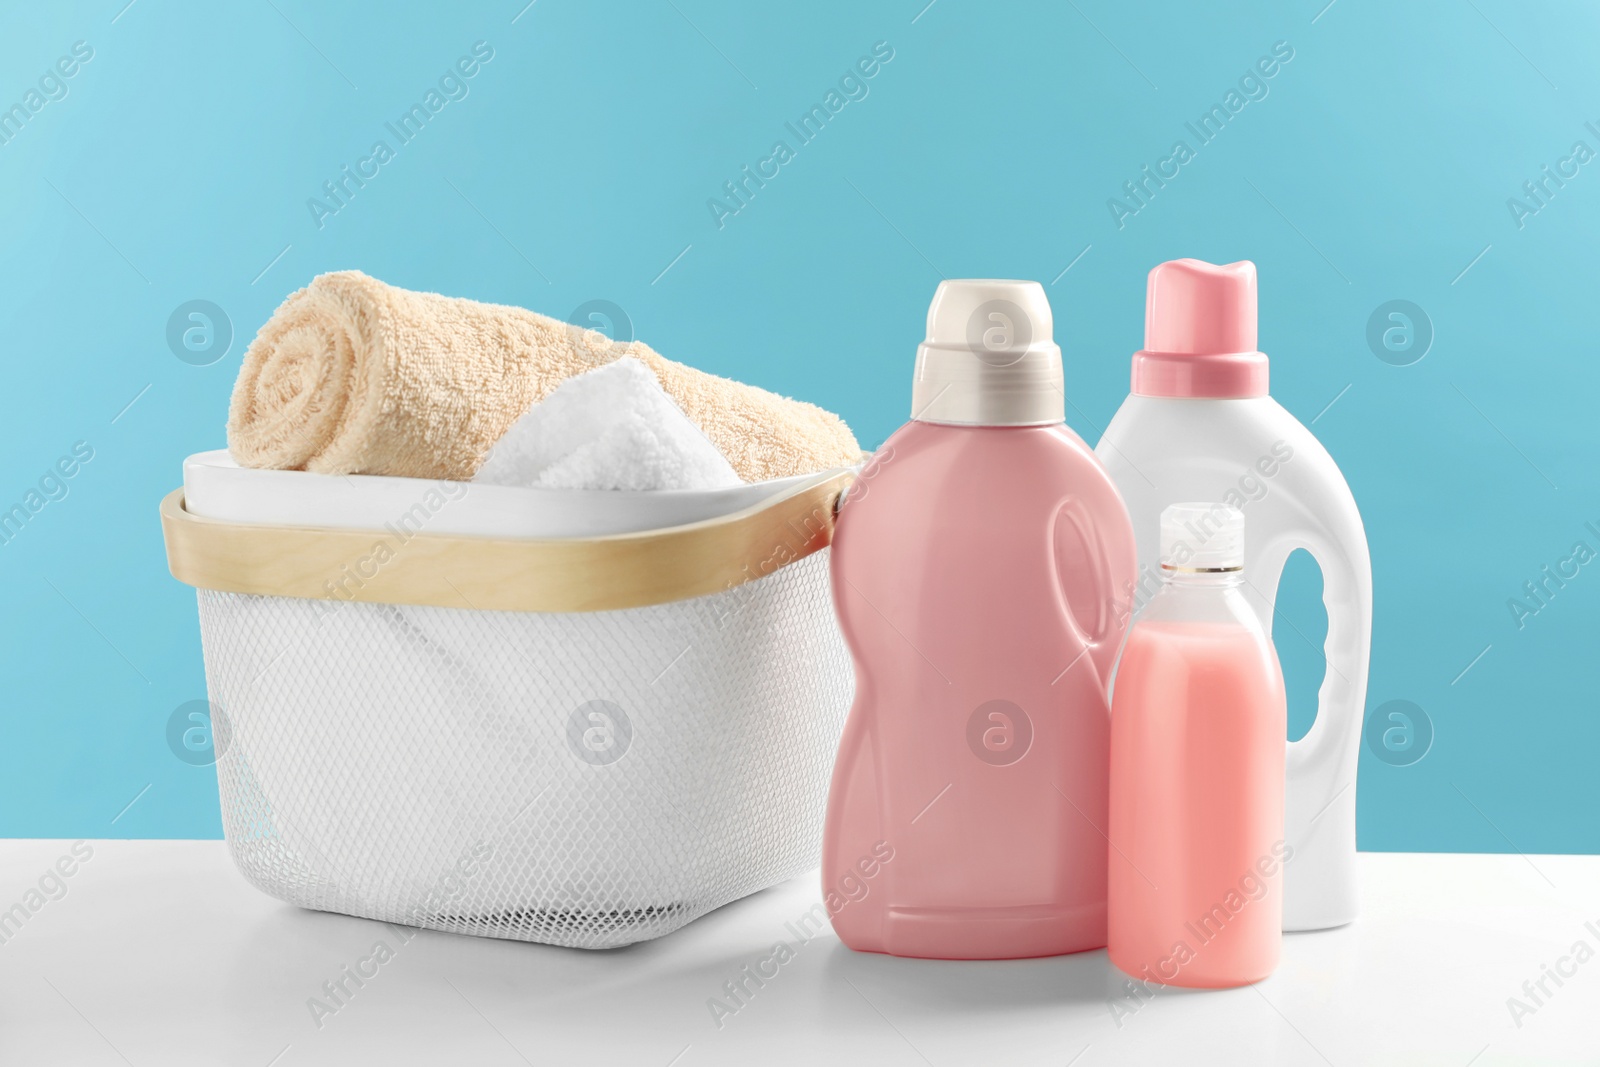 Photo of Bottles of laundry detergents and towels on white table